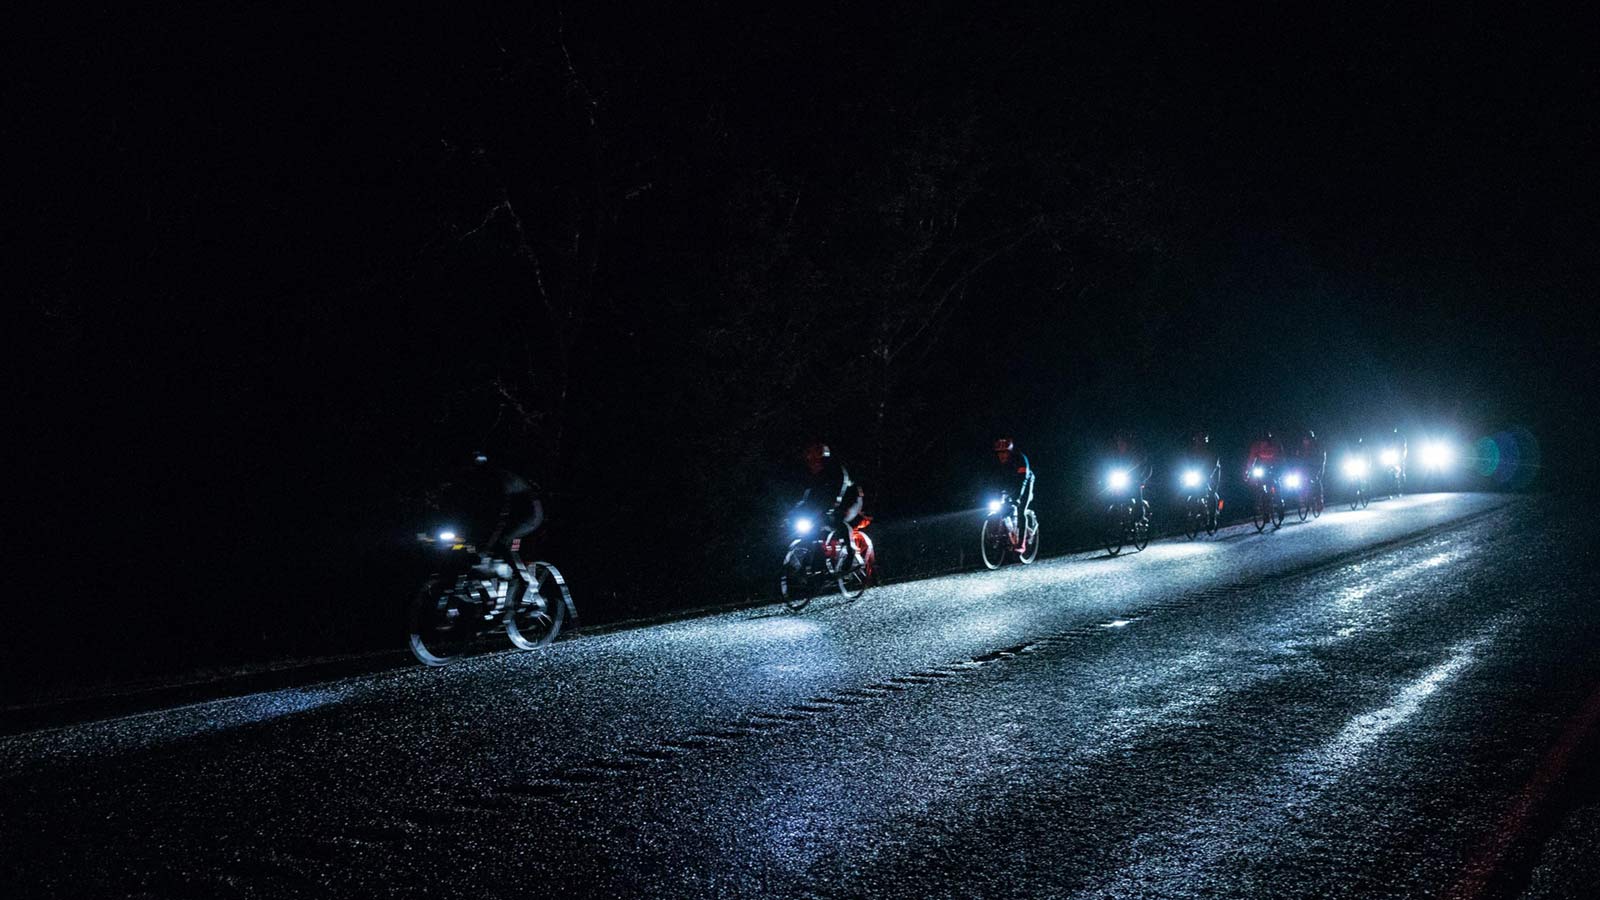 2019 Rapha Festive 500 10th anniversary edition, ride 500km outside from Christmas to New Years building fitness over the holidays